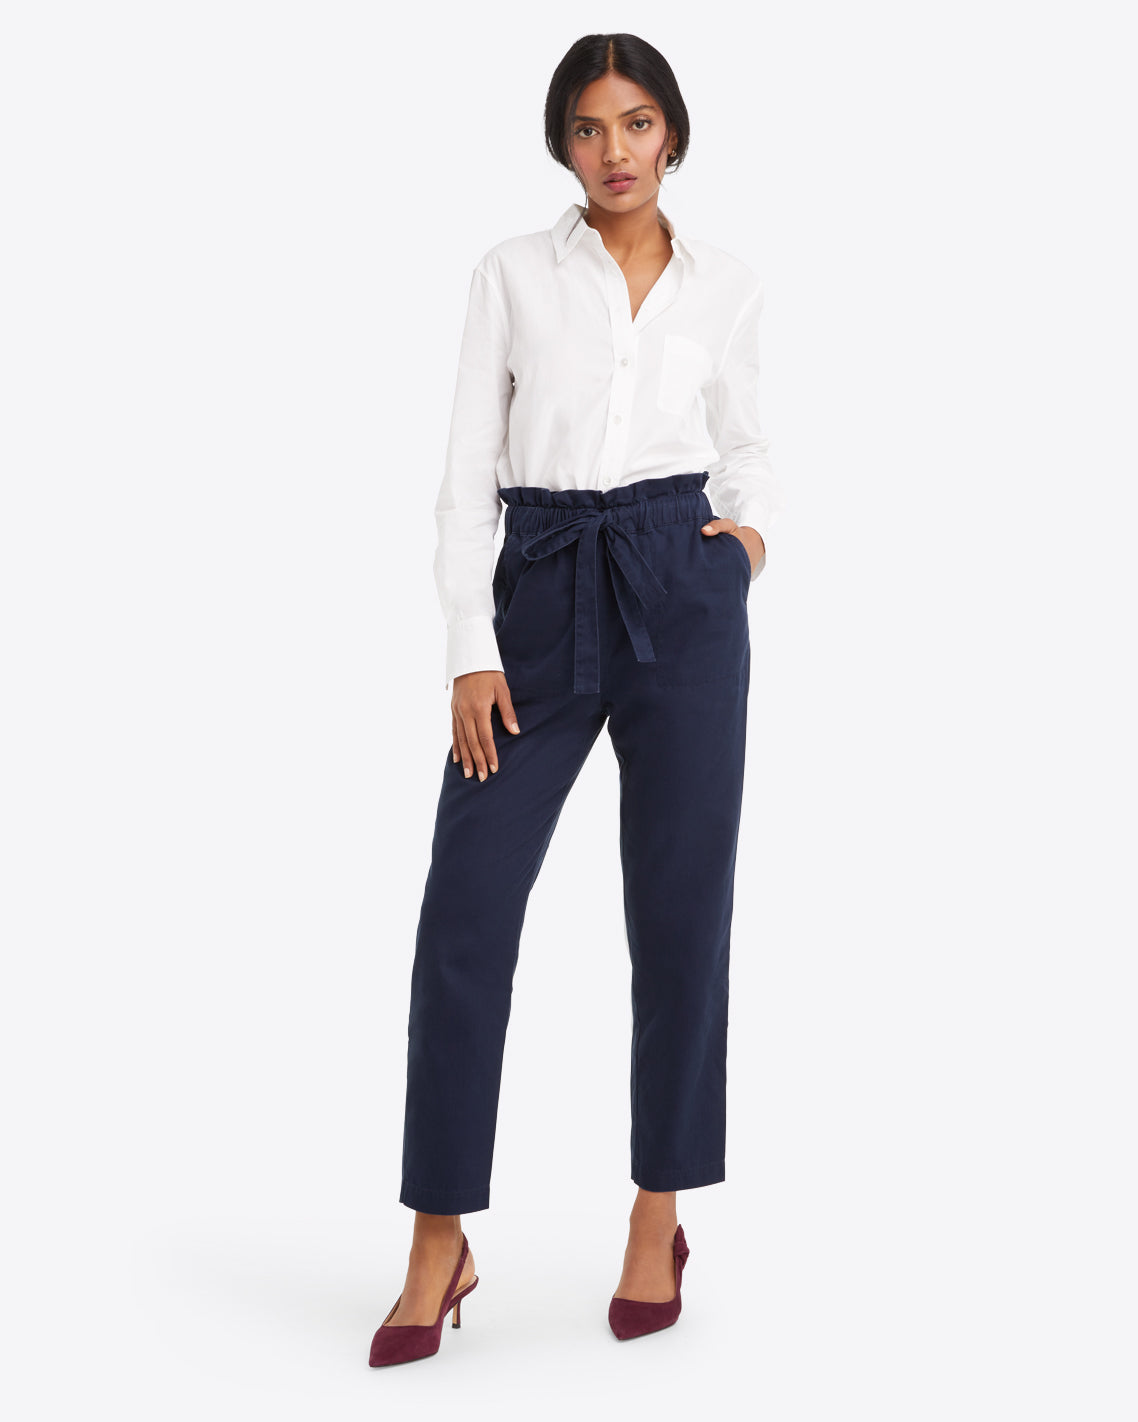 Paper Bag Pant in Washed Twill – Draper James